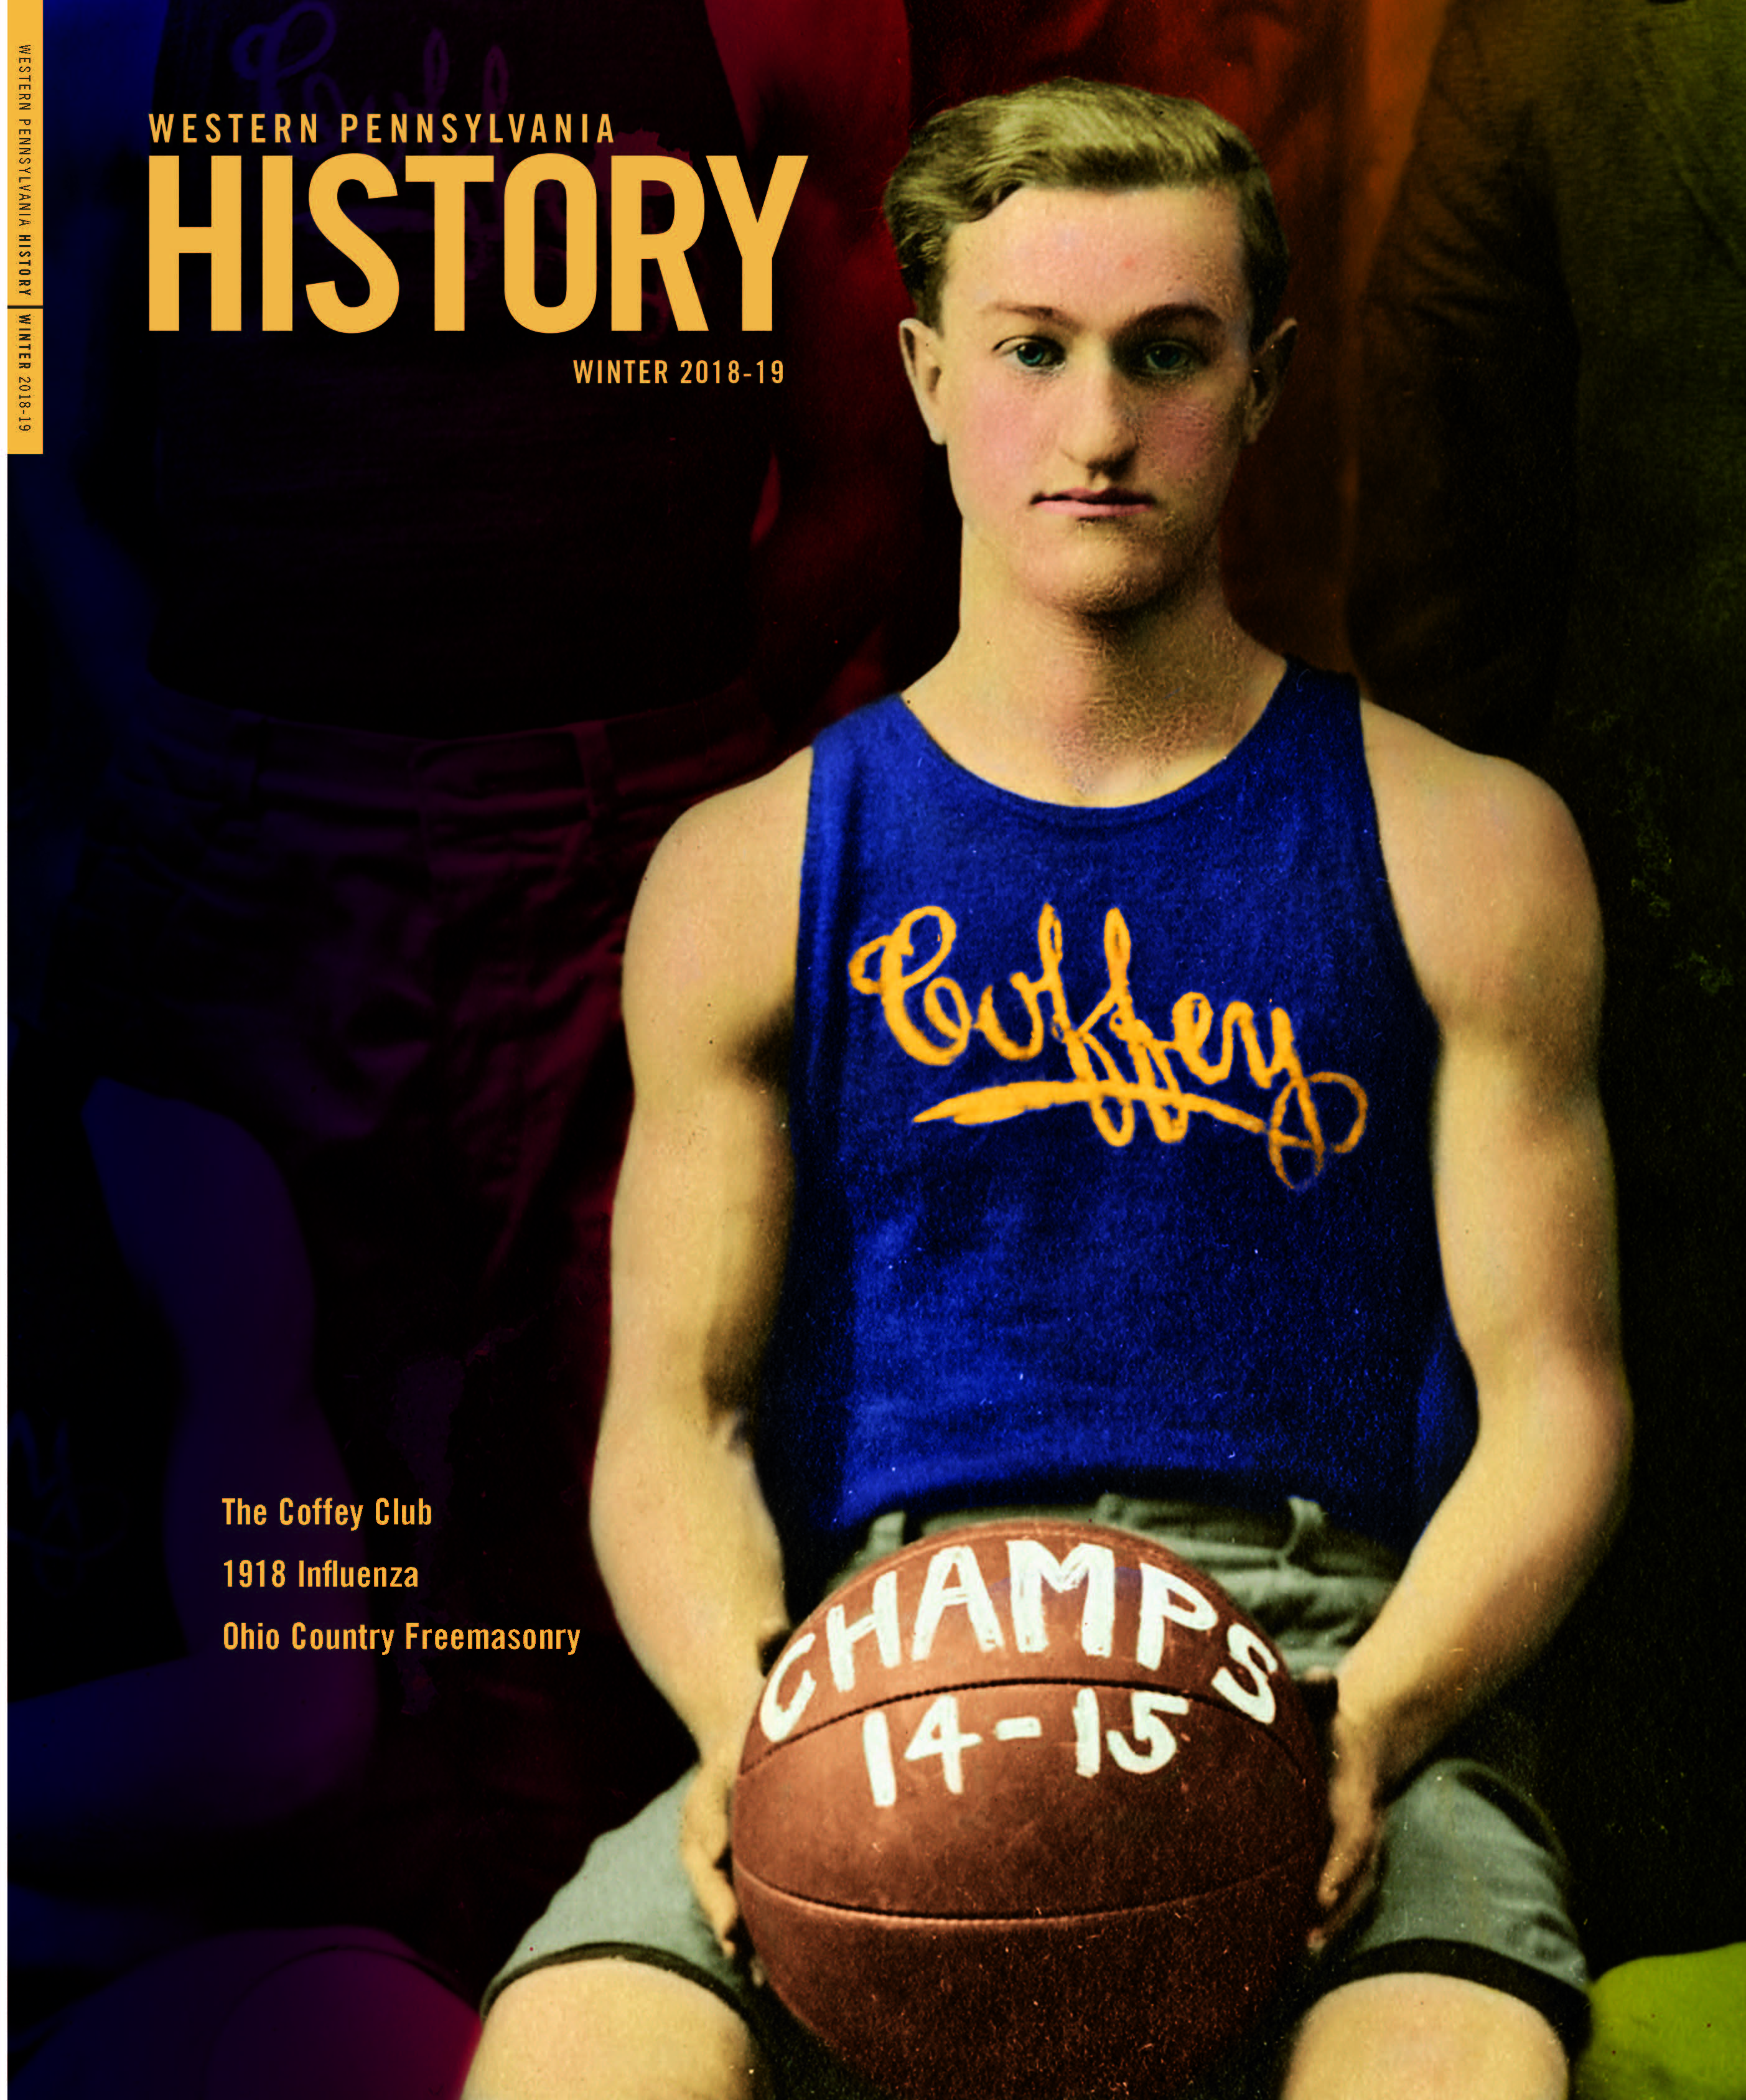 Western Pennsylvania History magazine cover Volume 101, Number 4, Winter 2018-2019 featuring an image of a football player with the name Coffey on his jersey, and a basketball that says Champs14-15